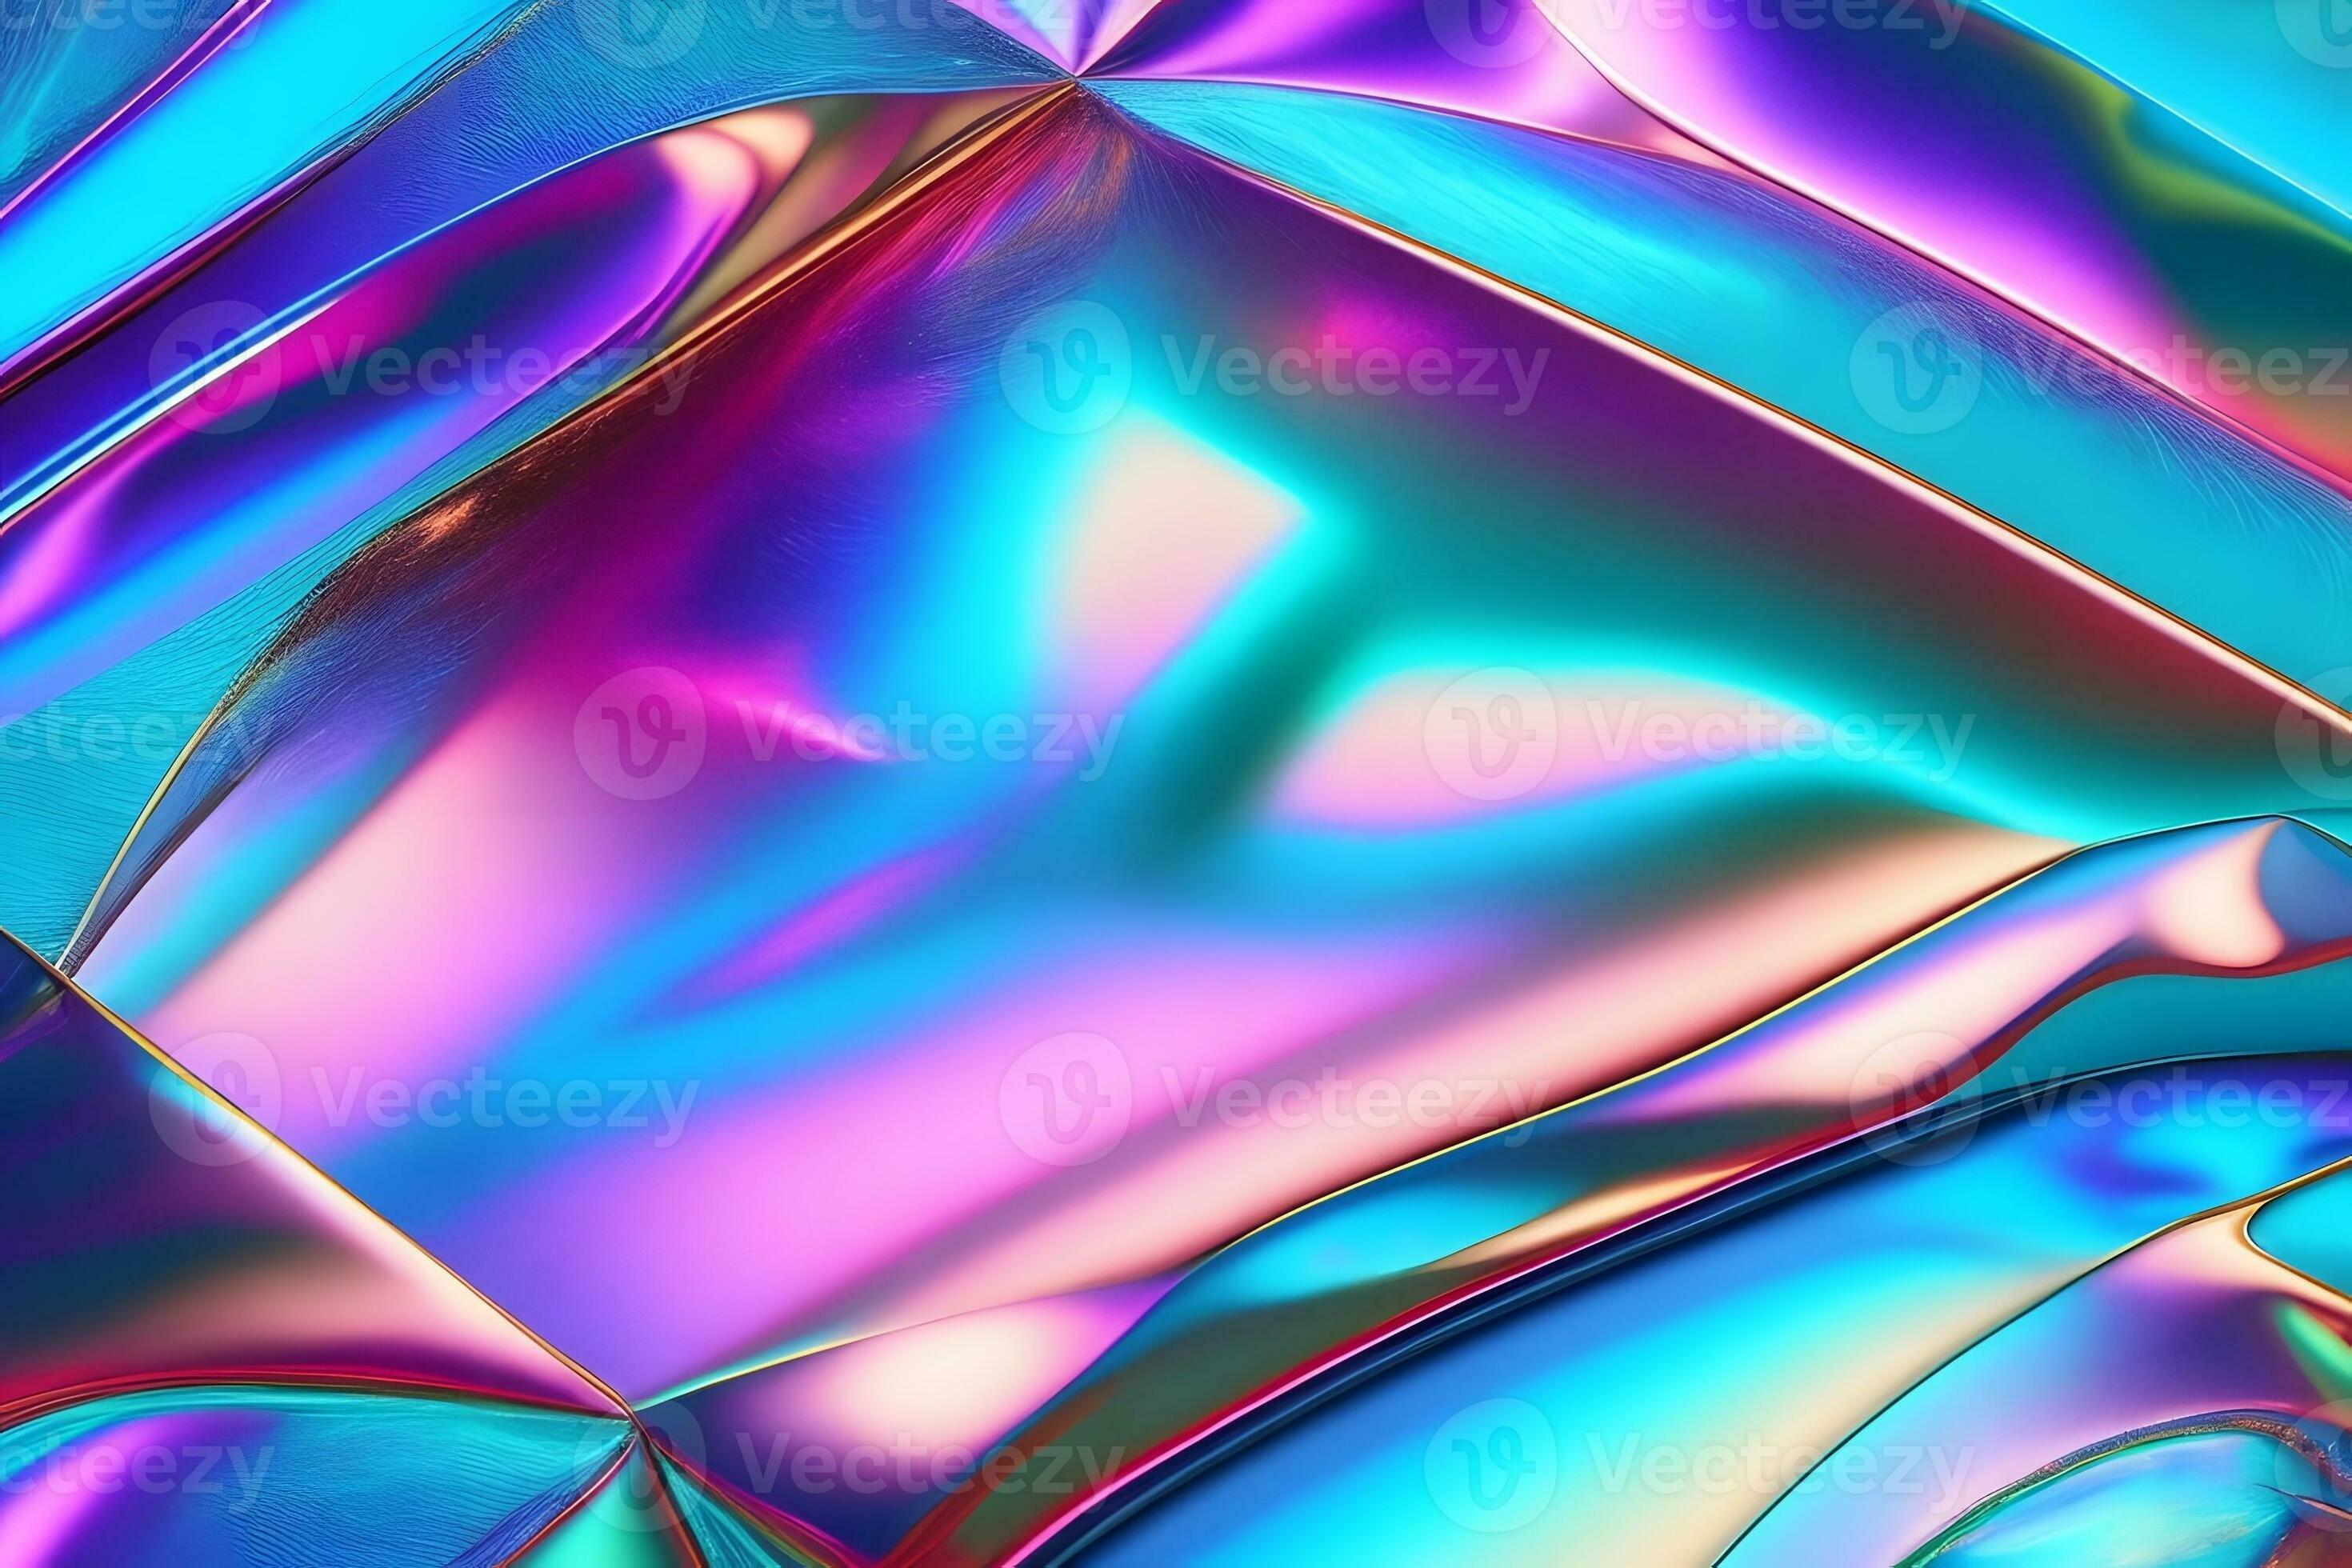 100+ Best Holographic & Iridescent Textures (Effects and More